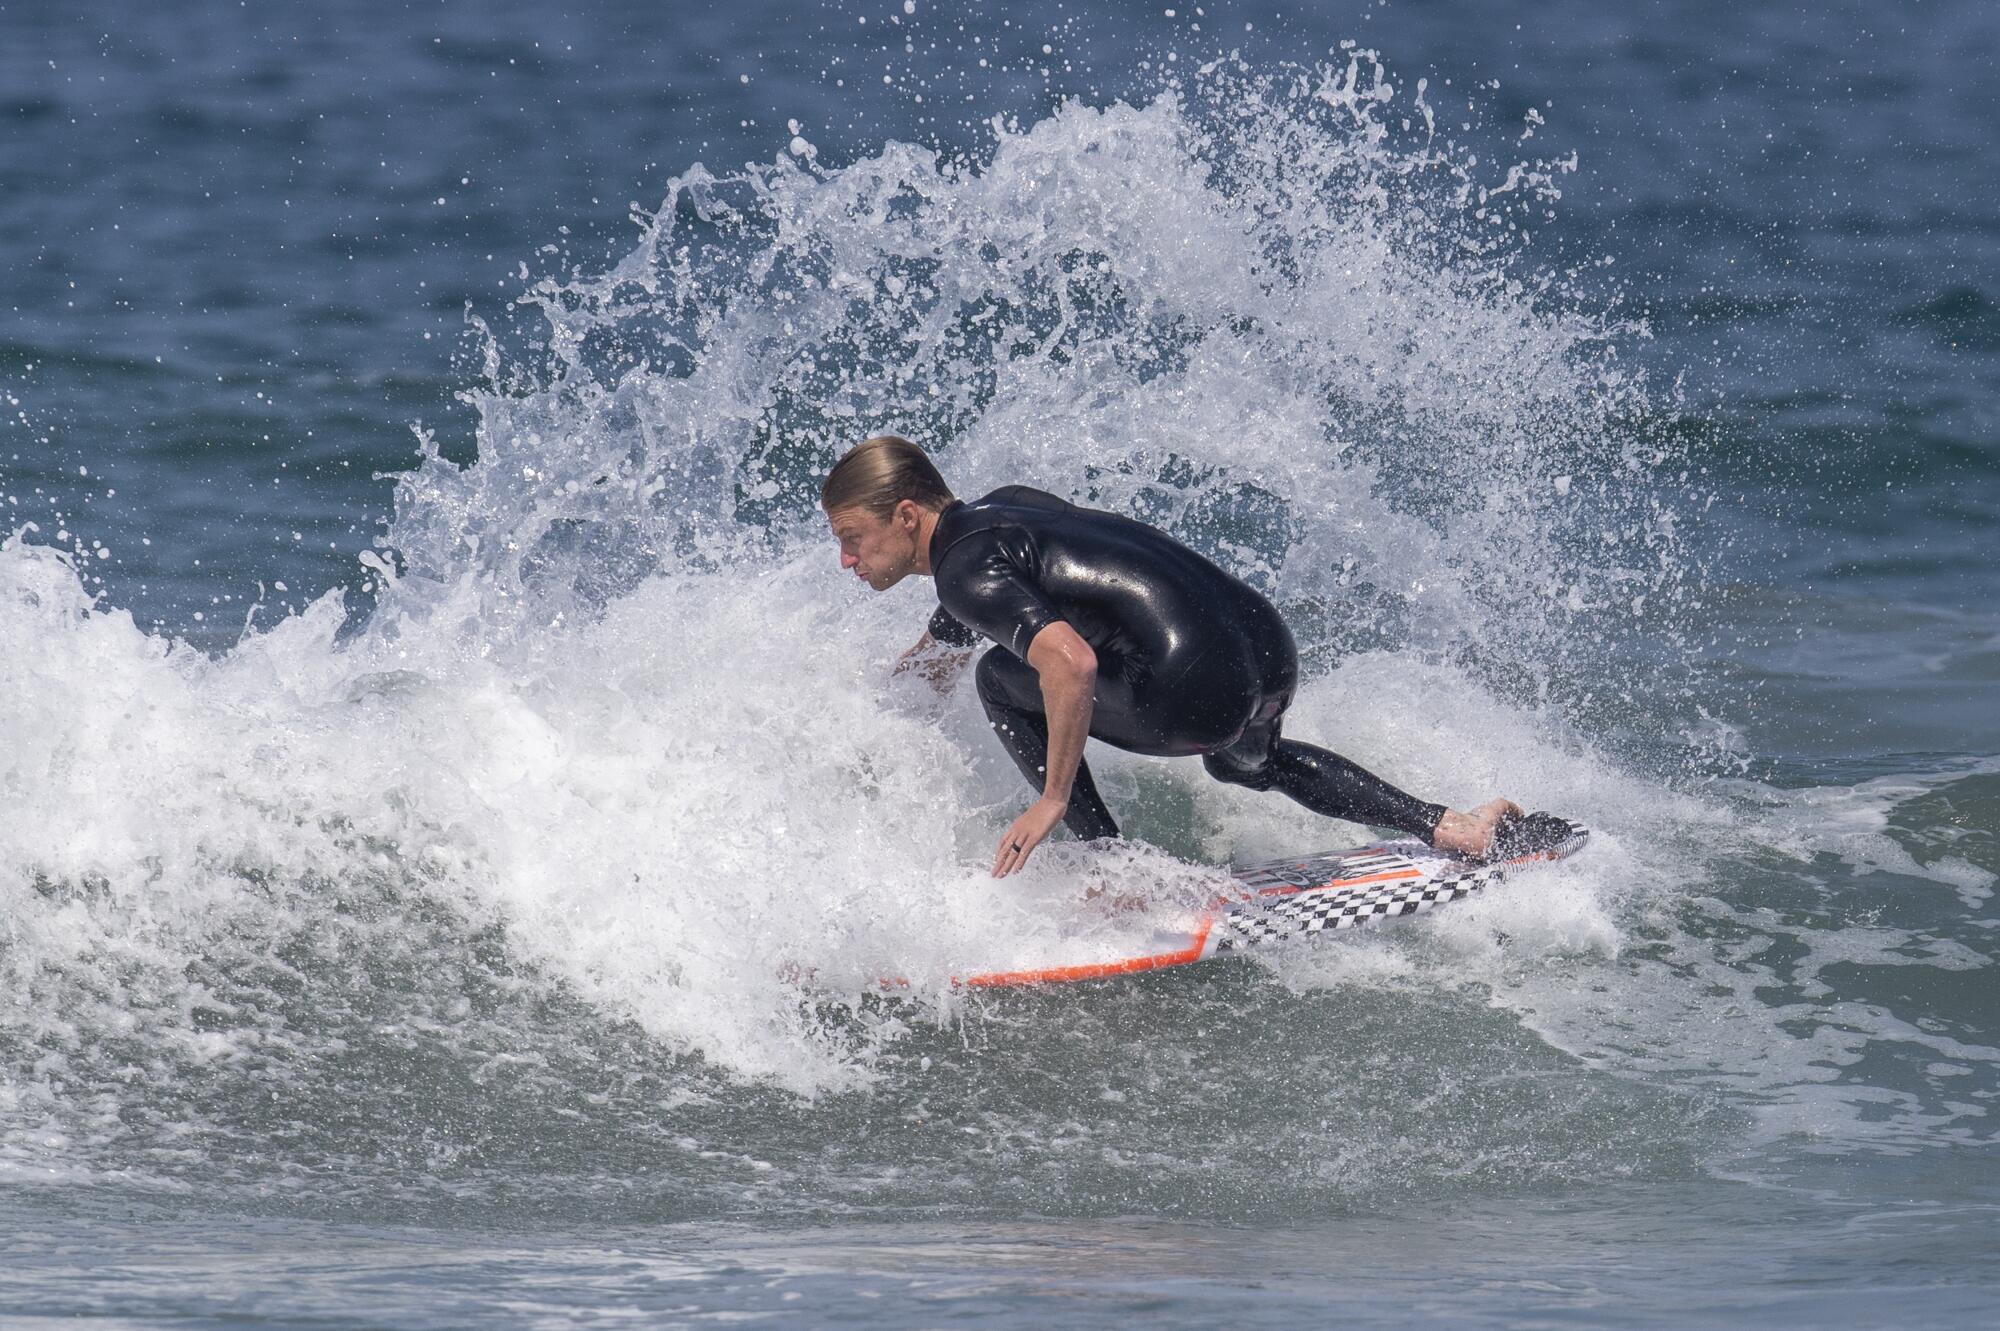 Kolohe Andino does a backside snap on a small wave at Bolsa Chica State Beach.